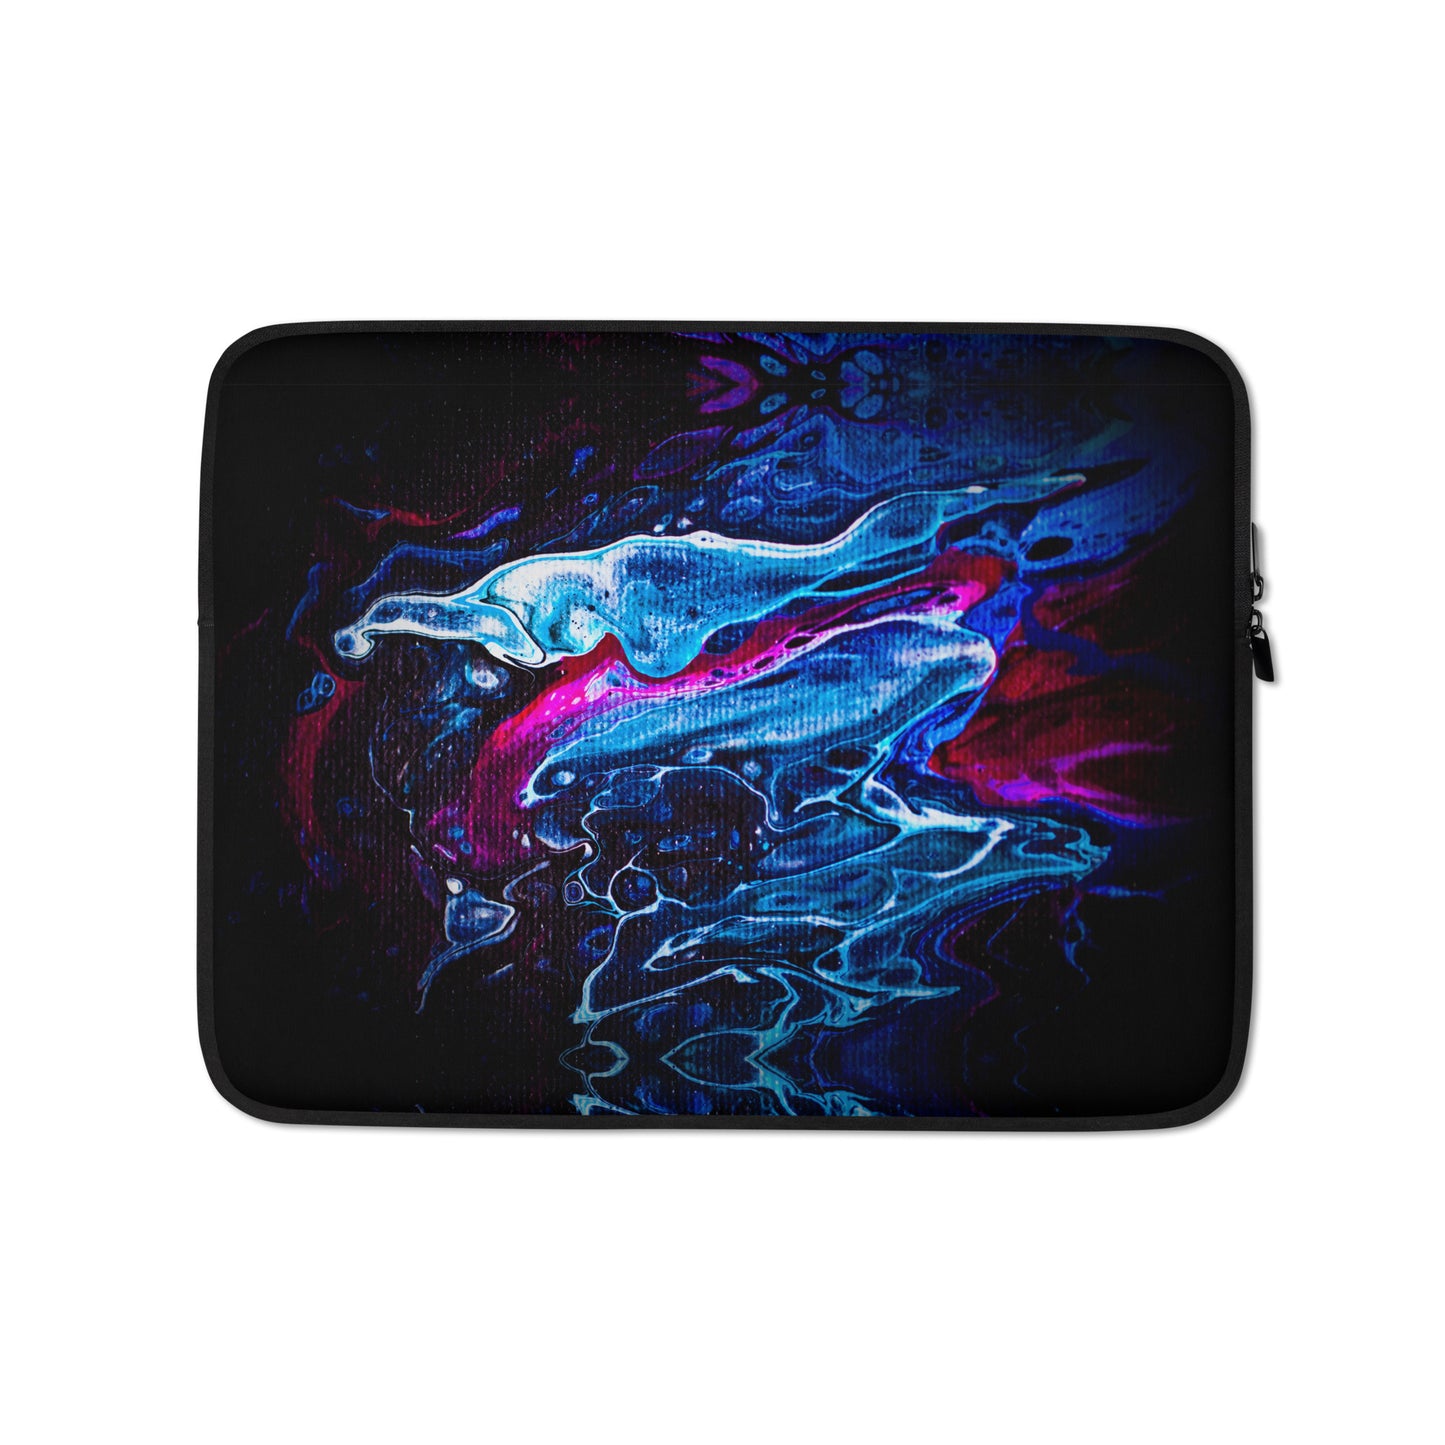 NightOwl Studio Padded Laptop Sleeve with Faux Fur Lining, 13 and 15 Inch Covers for Portable Computers and Large Tablets, Slim and Portable Neoprene for Work, Travel, or Gaming, Blue Liquid